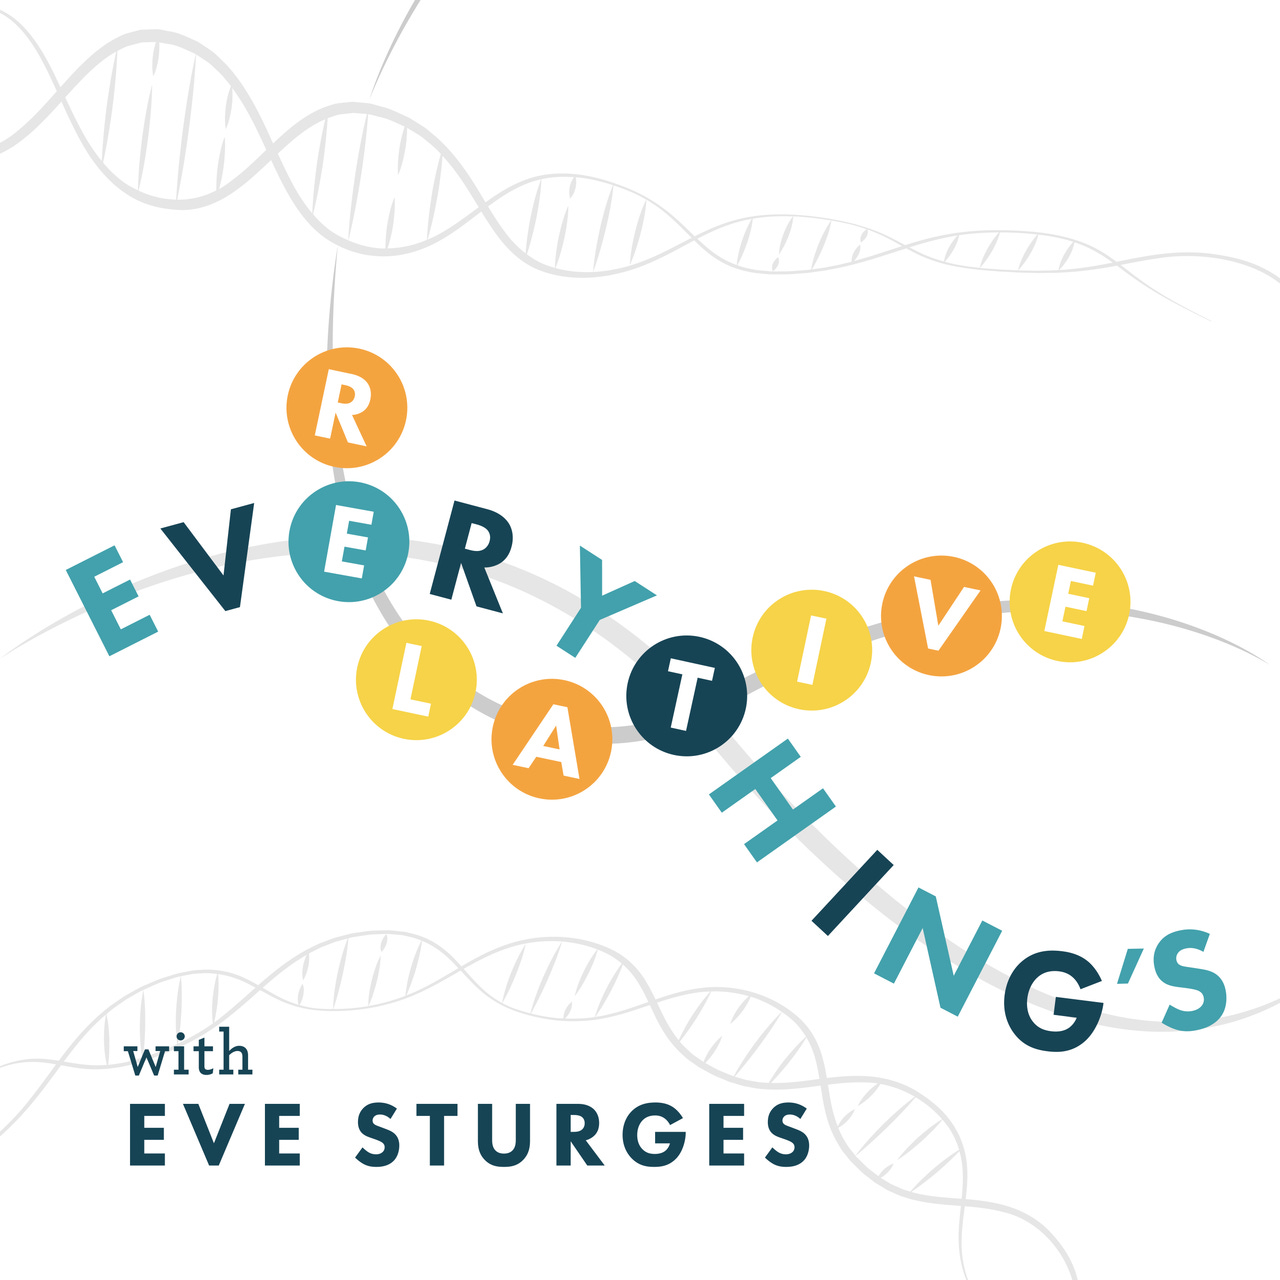 Everything's Relative Podcast: The Substack